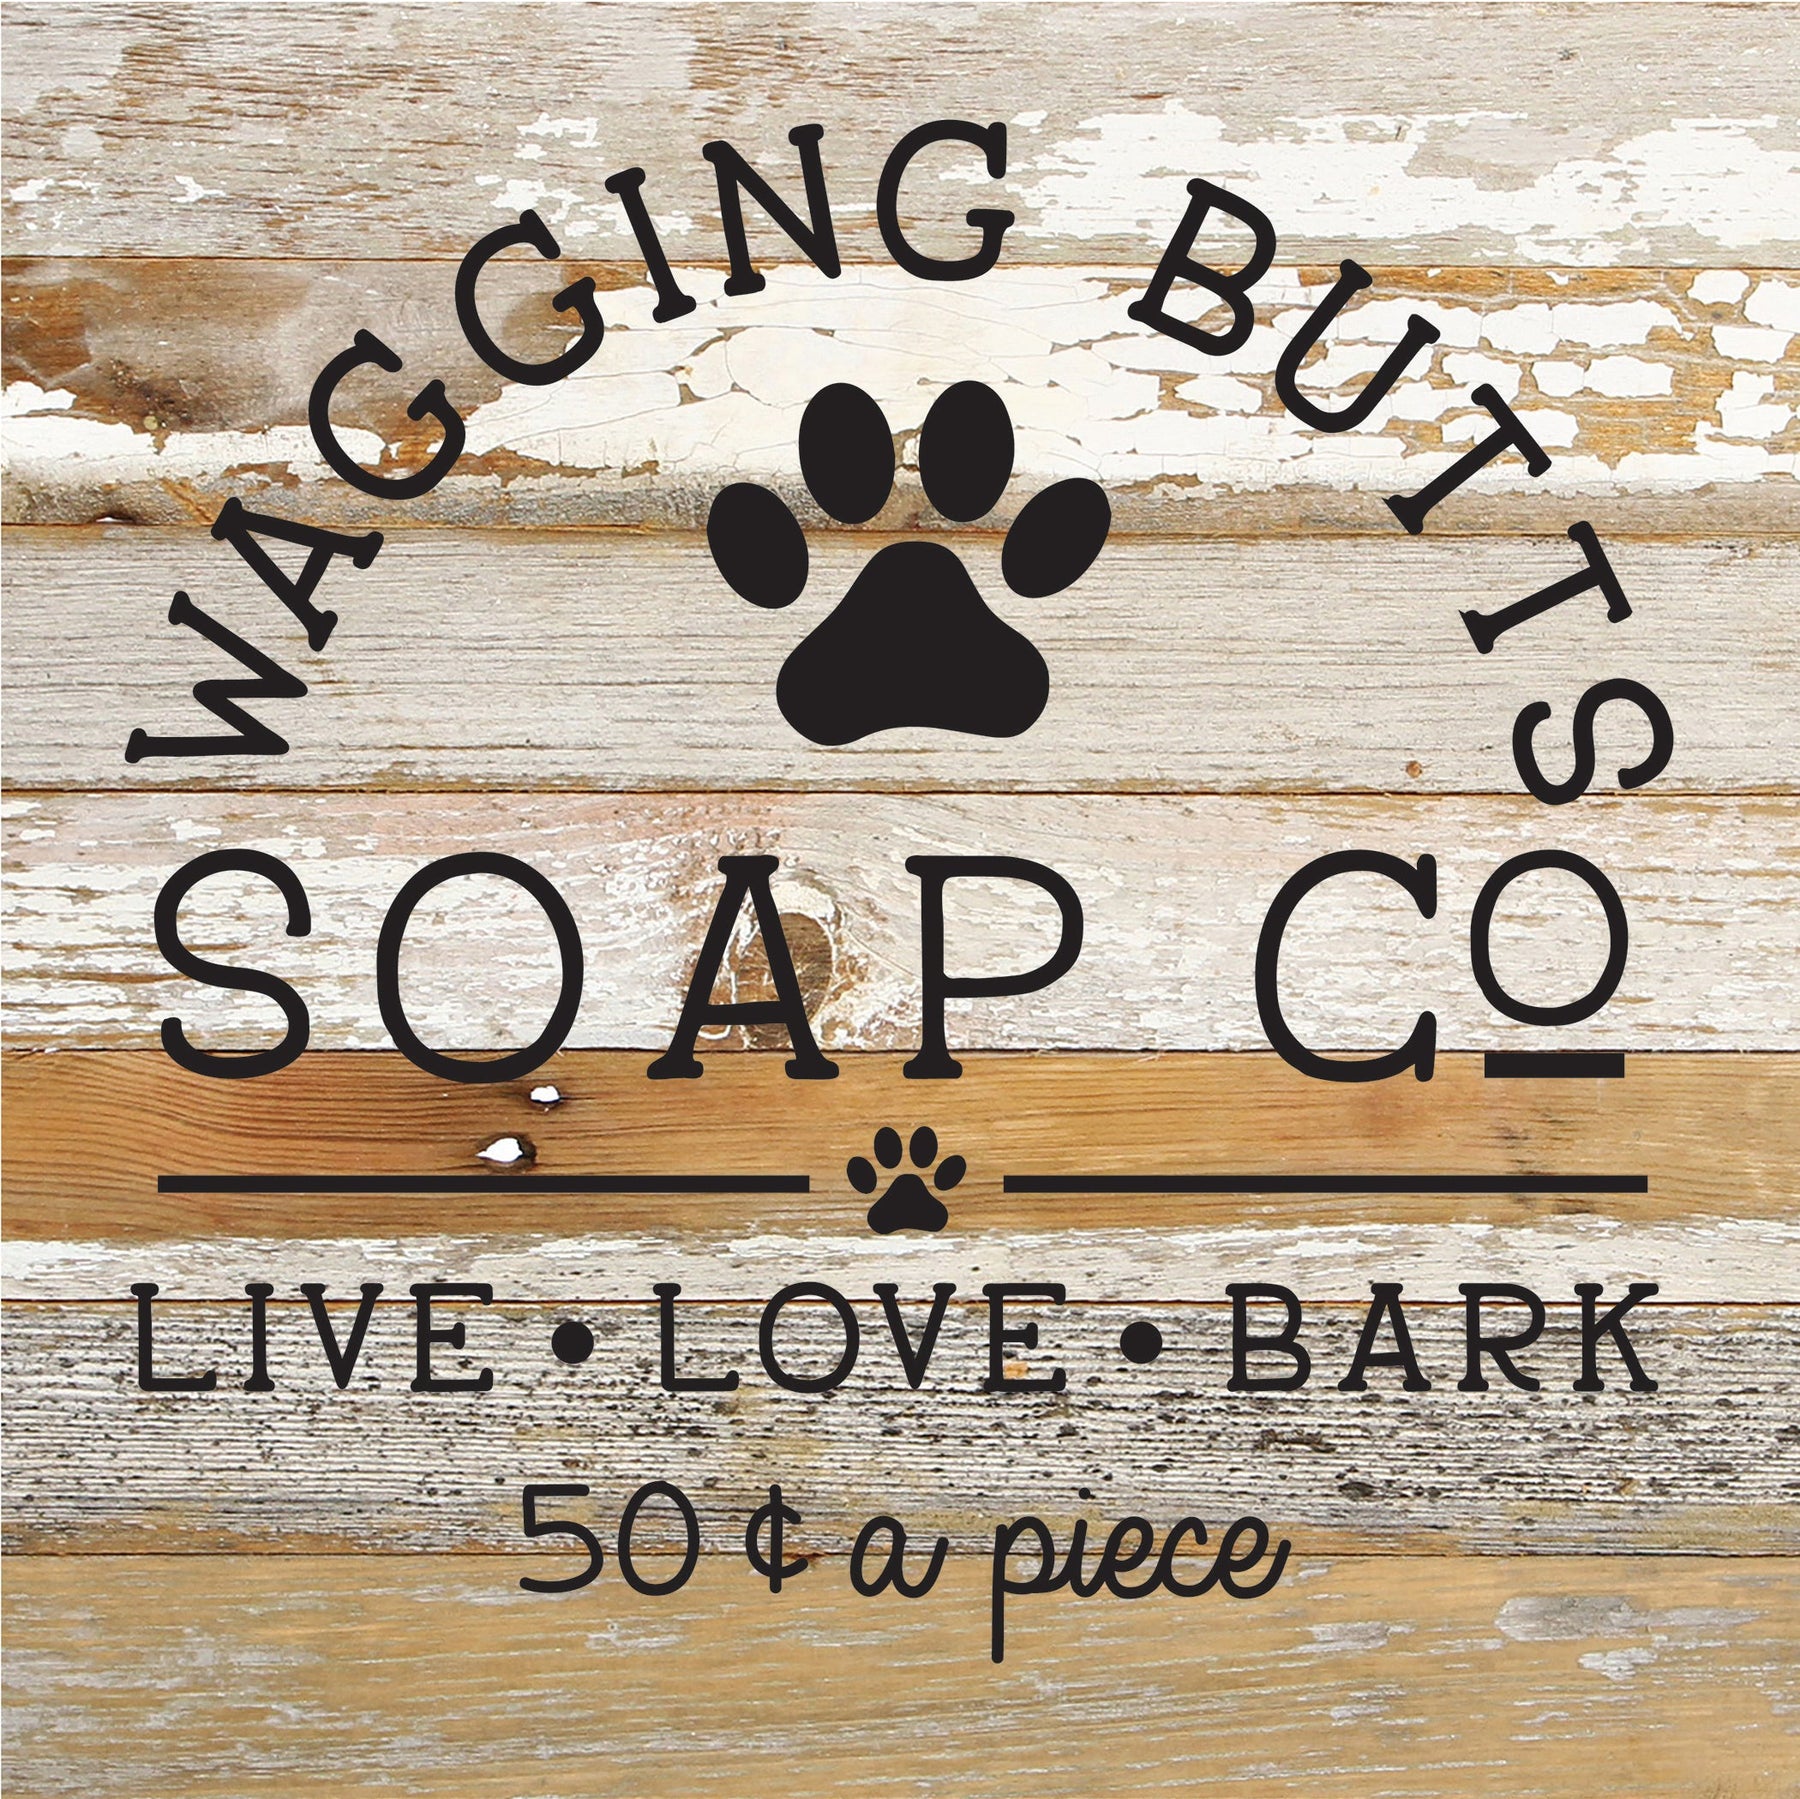 Wagging Butts Soap Co. : Live, Love, Bark / 10x10 Reclaimed Wood Sign